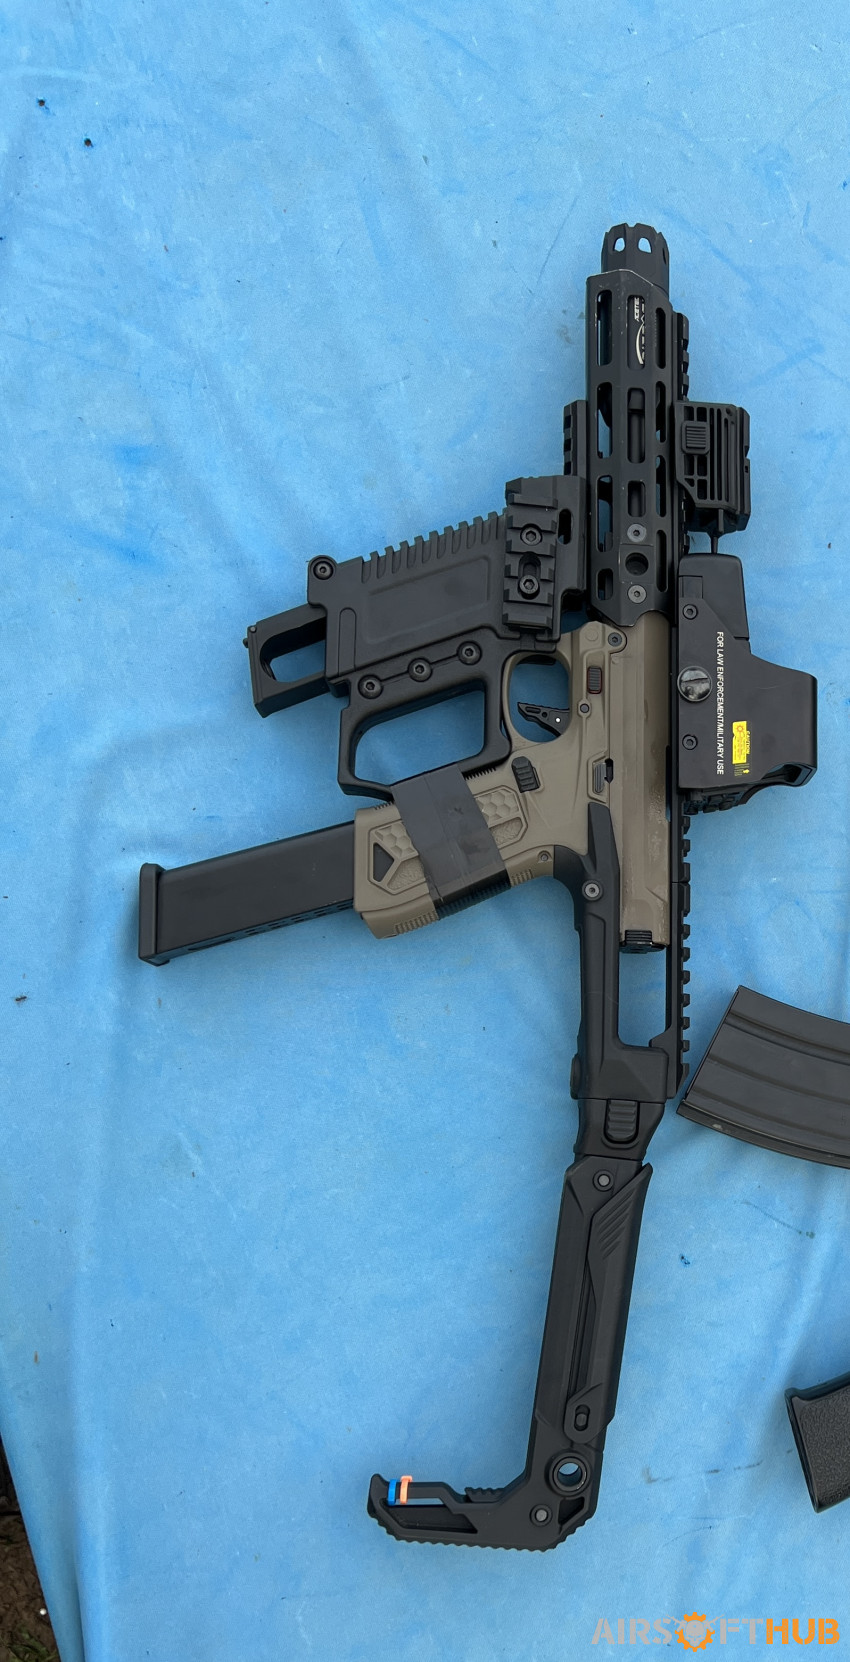 AAP-01 upper, stock and extras - Used airsoft equipment